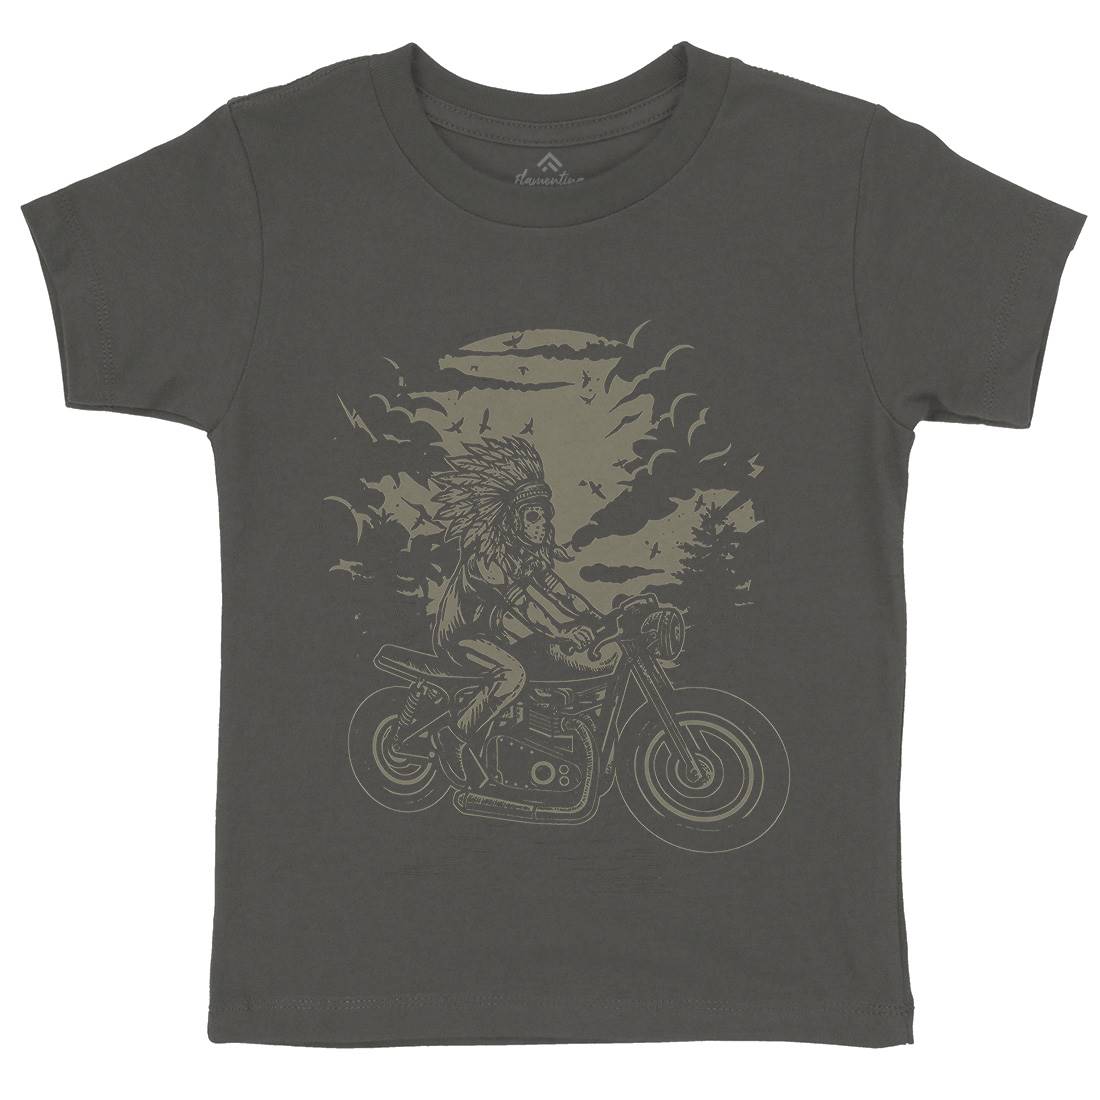 Indian Chief Rider Kids Crew Neck T-Shirt Motorcycles A546